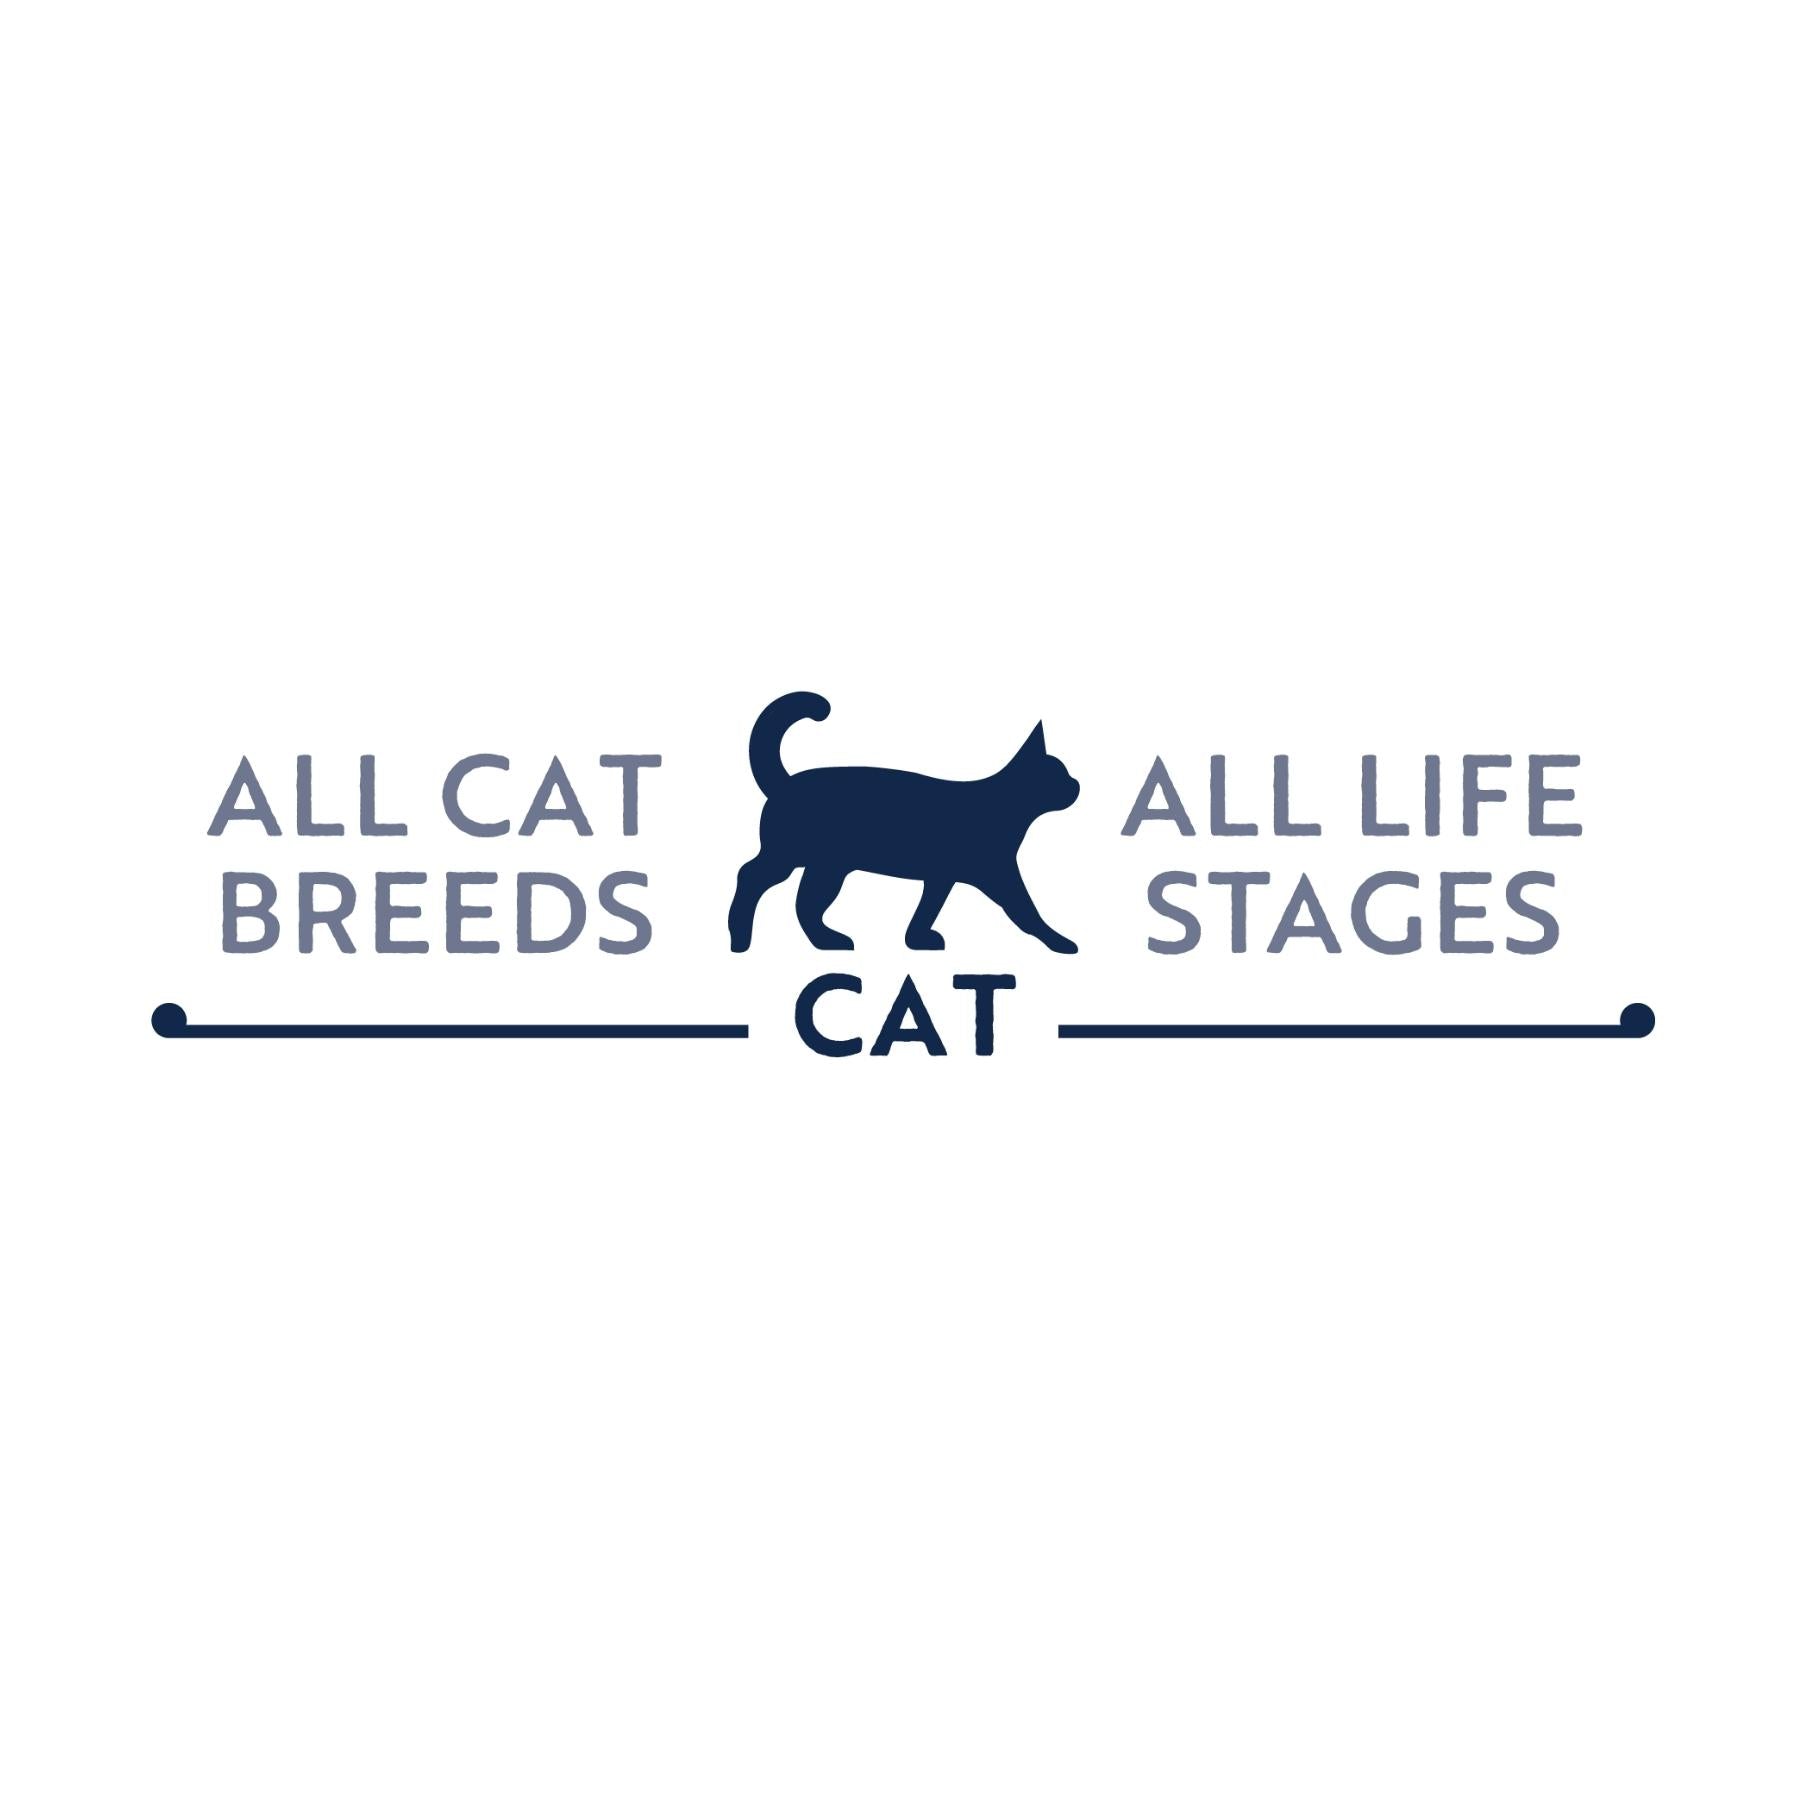 All Cat Breeds or Life Stages.